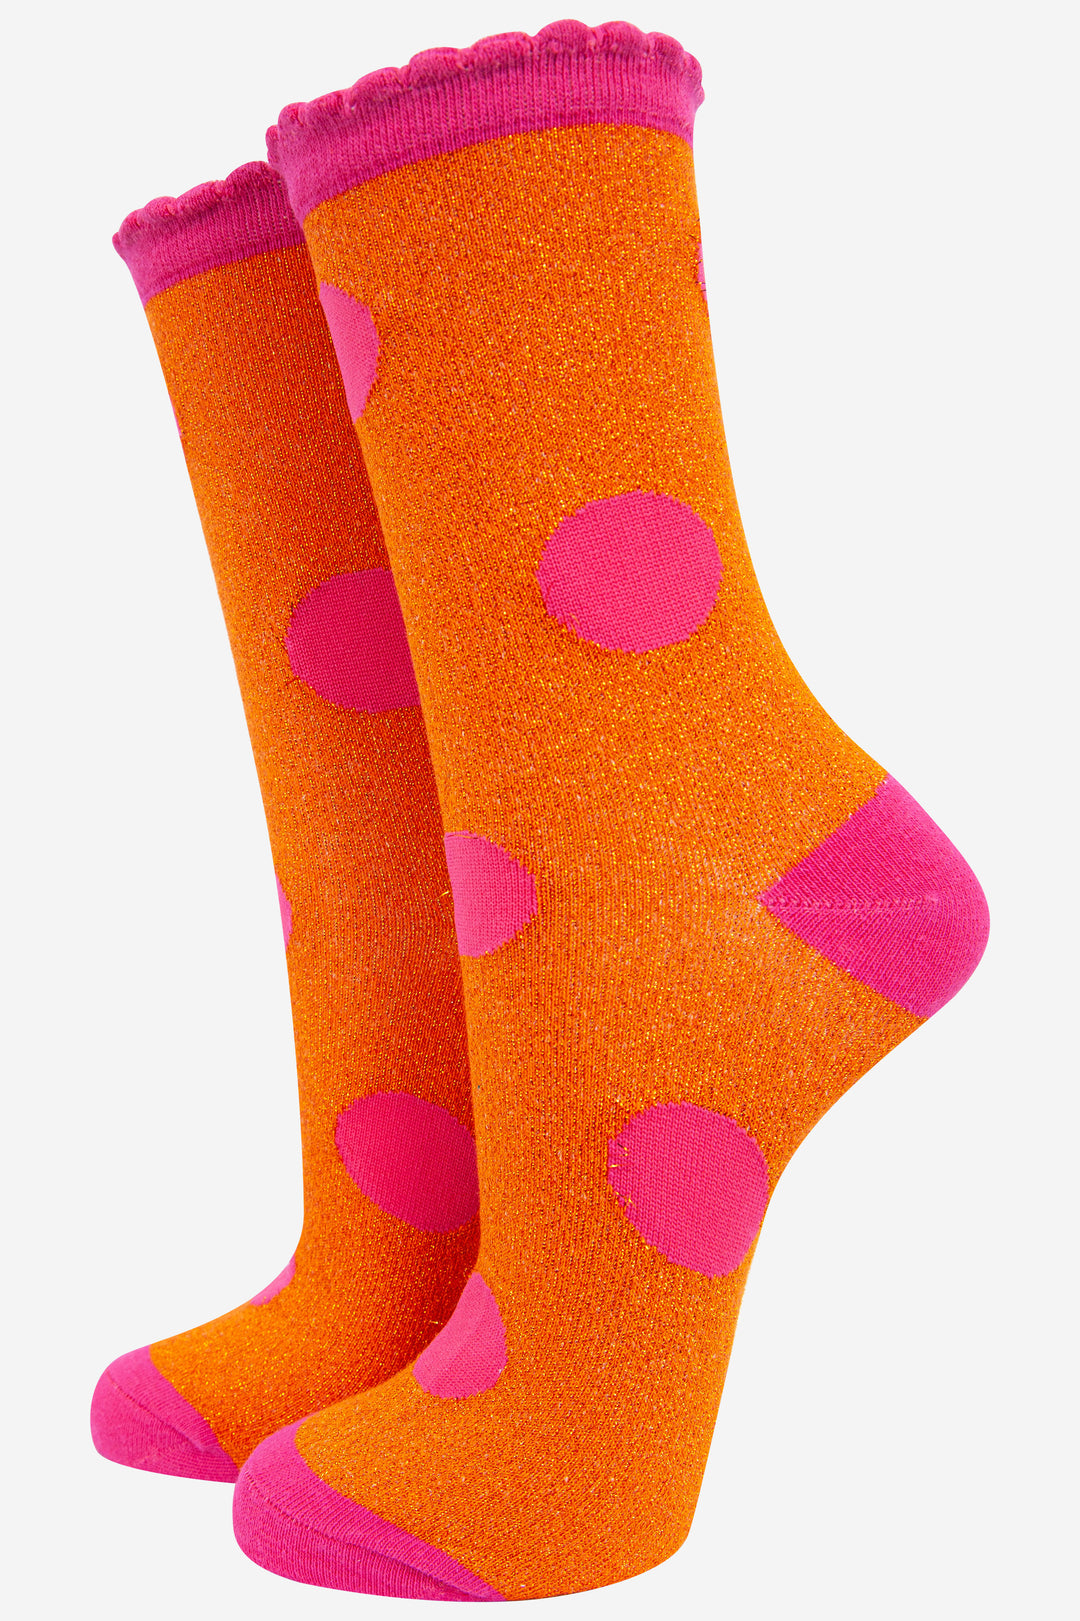 orange and pink polka dot glitter socks with pink scalloped top and an all over glitter sparkle